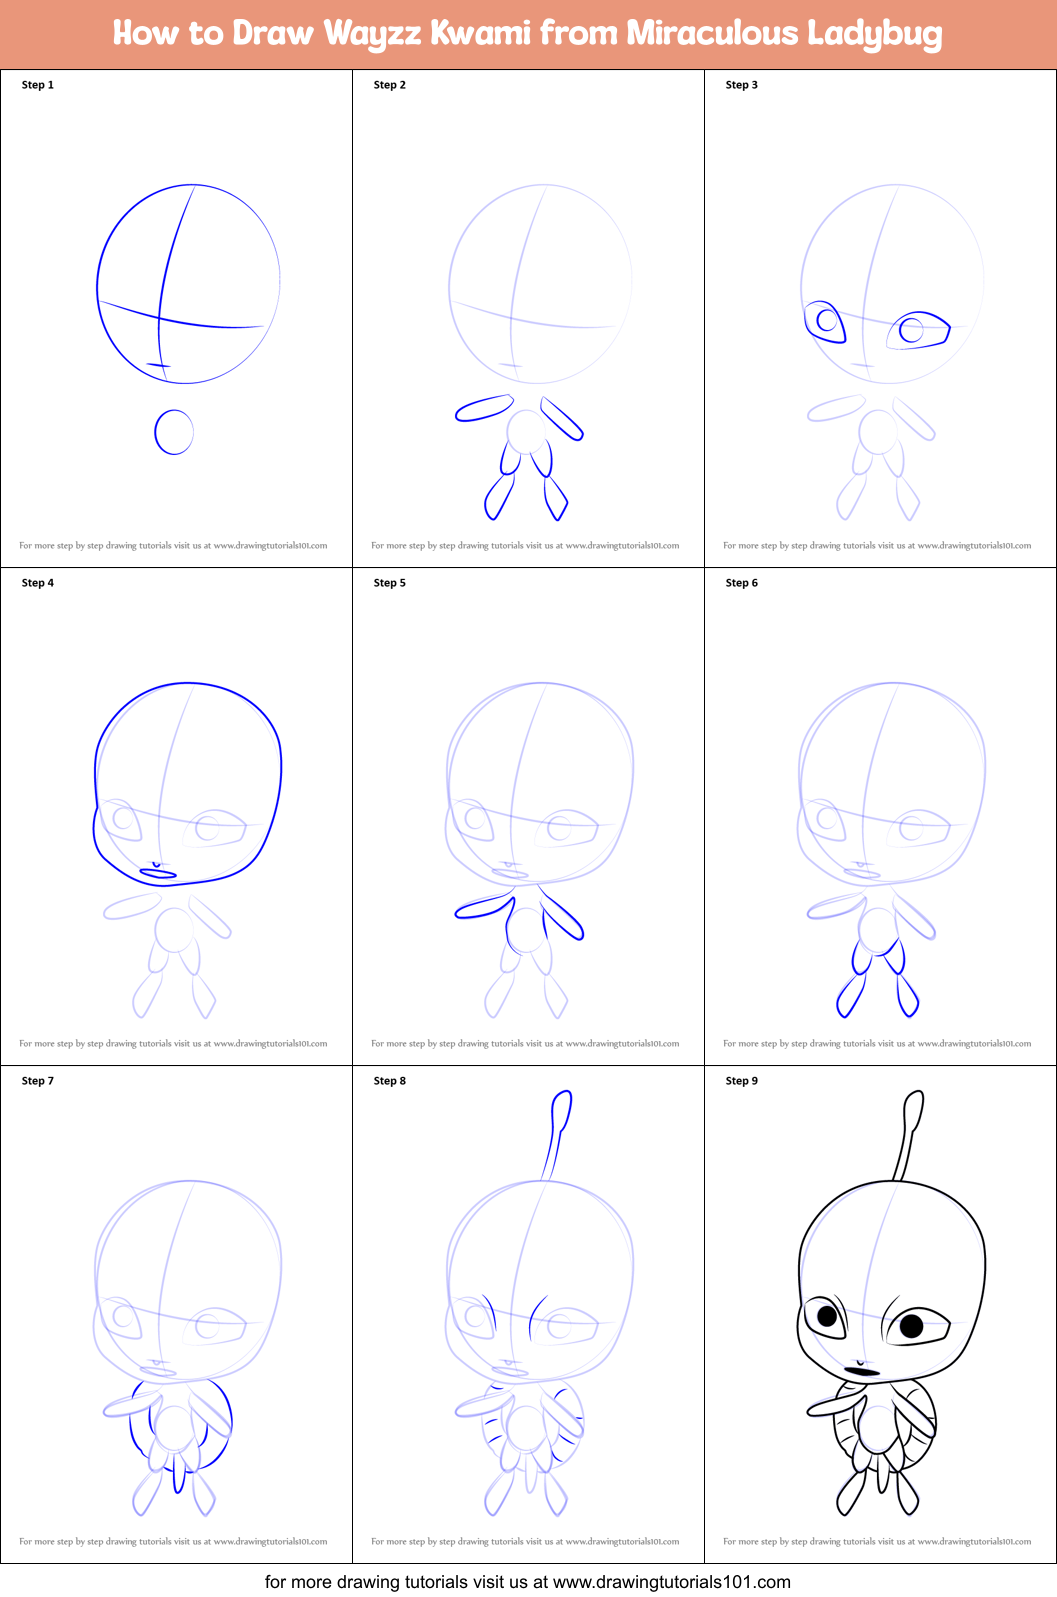 Kwami Step By Step / Learn How to Draw Nooroo Kwami from Miraculous Ladybug ... / Kwami step by step | i do not have a name for the kwami yet, i am leaning towards mii?